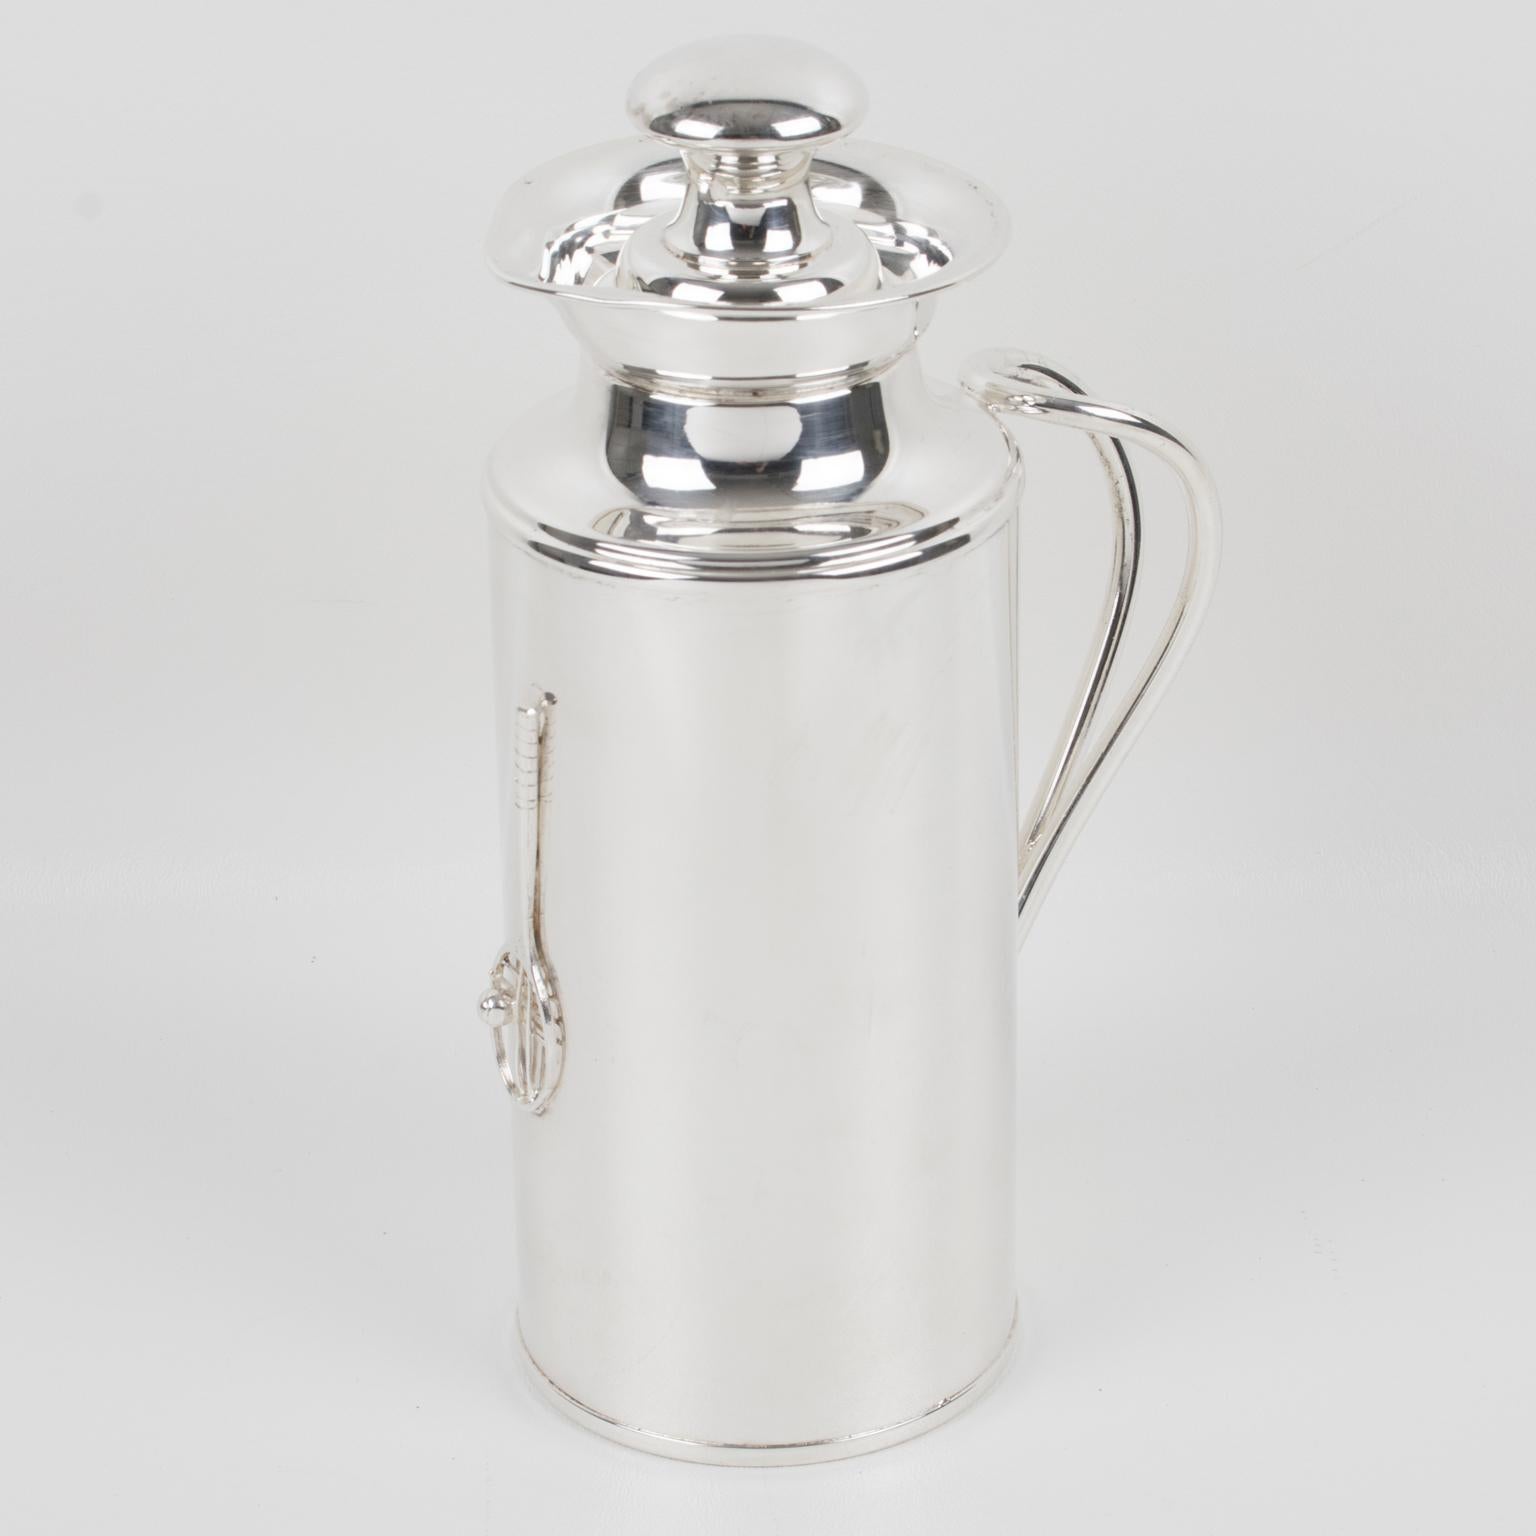 This streamlined Italian silver plate barware thermos or insulated decanter features a sleek and modernist design. The insulated carafe is made from silver plate metal. This bar accessory has a rounded shape ornate with double handles and a tennis